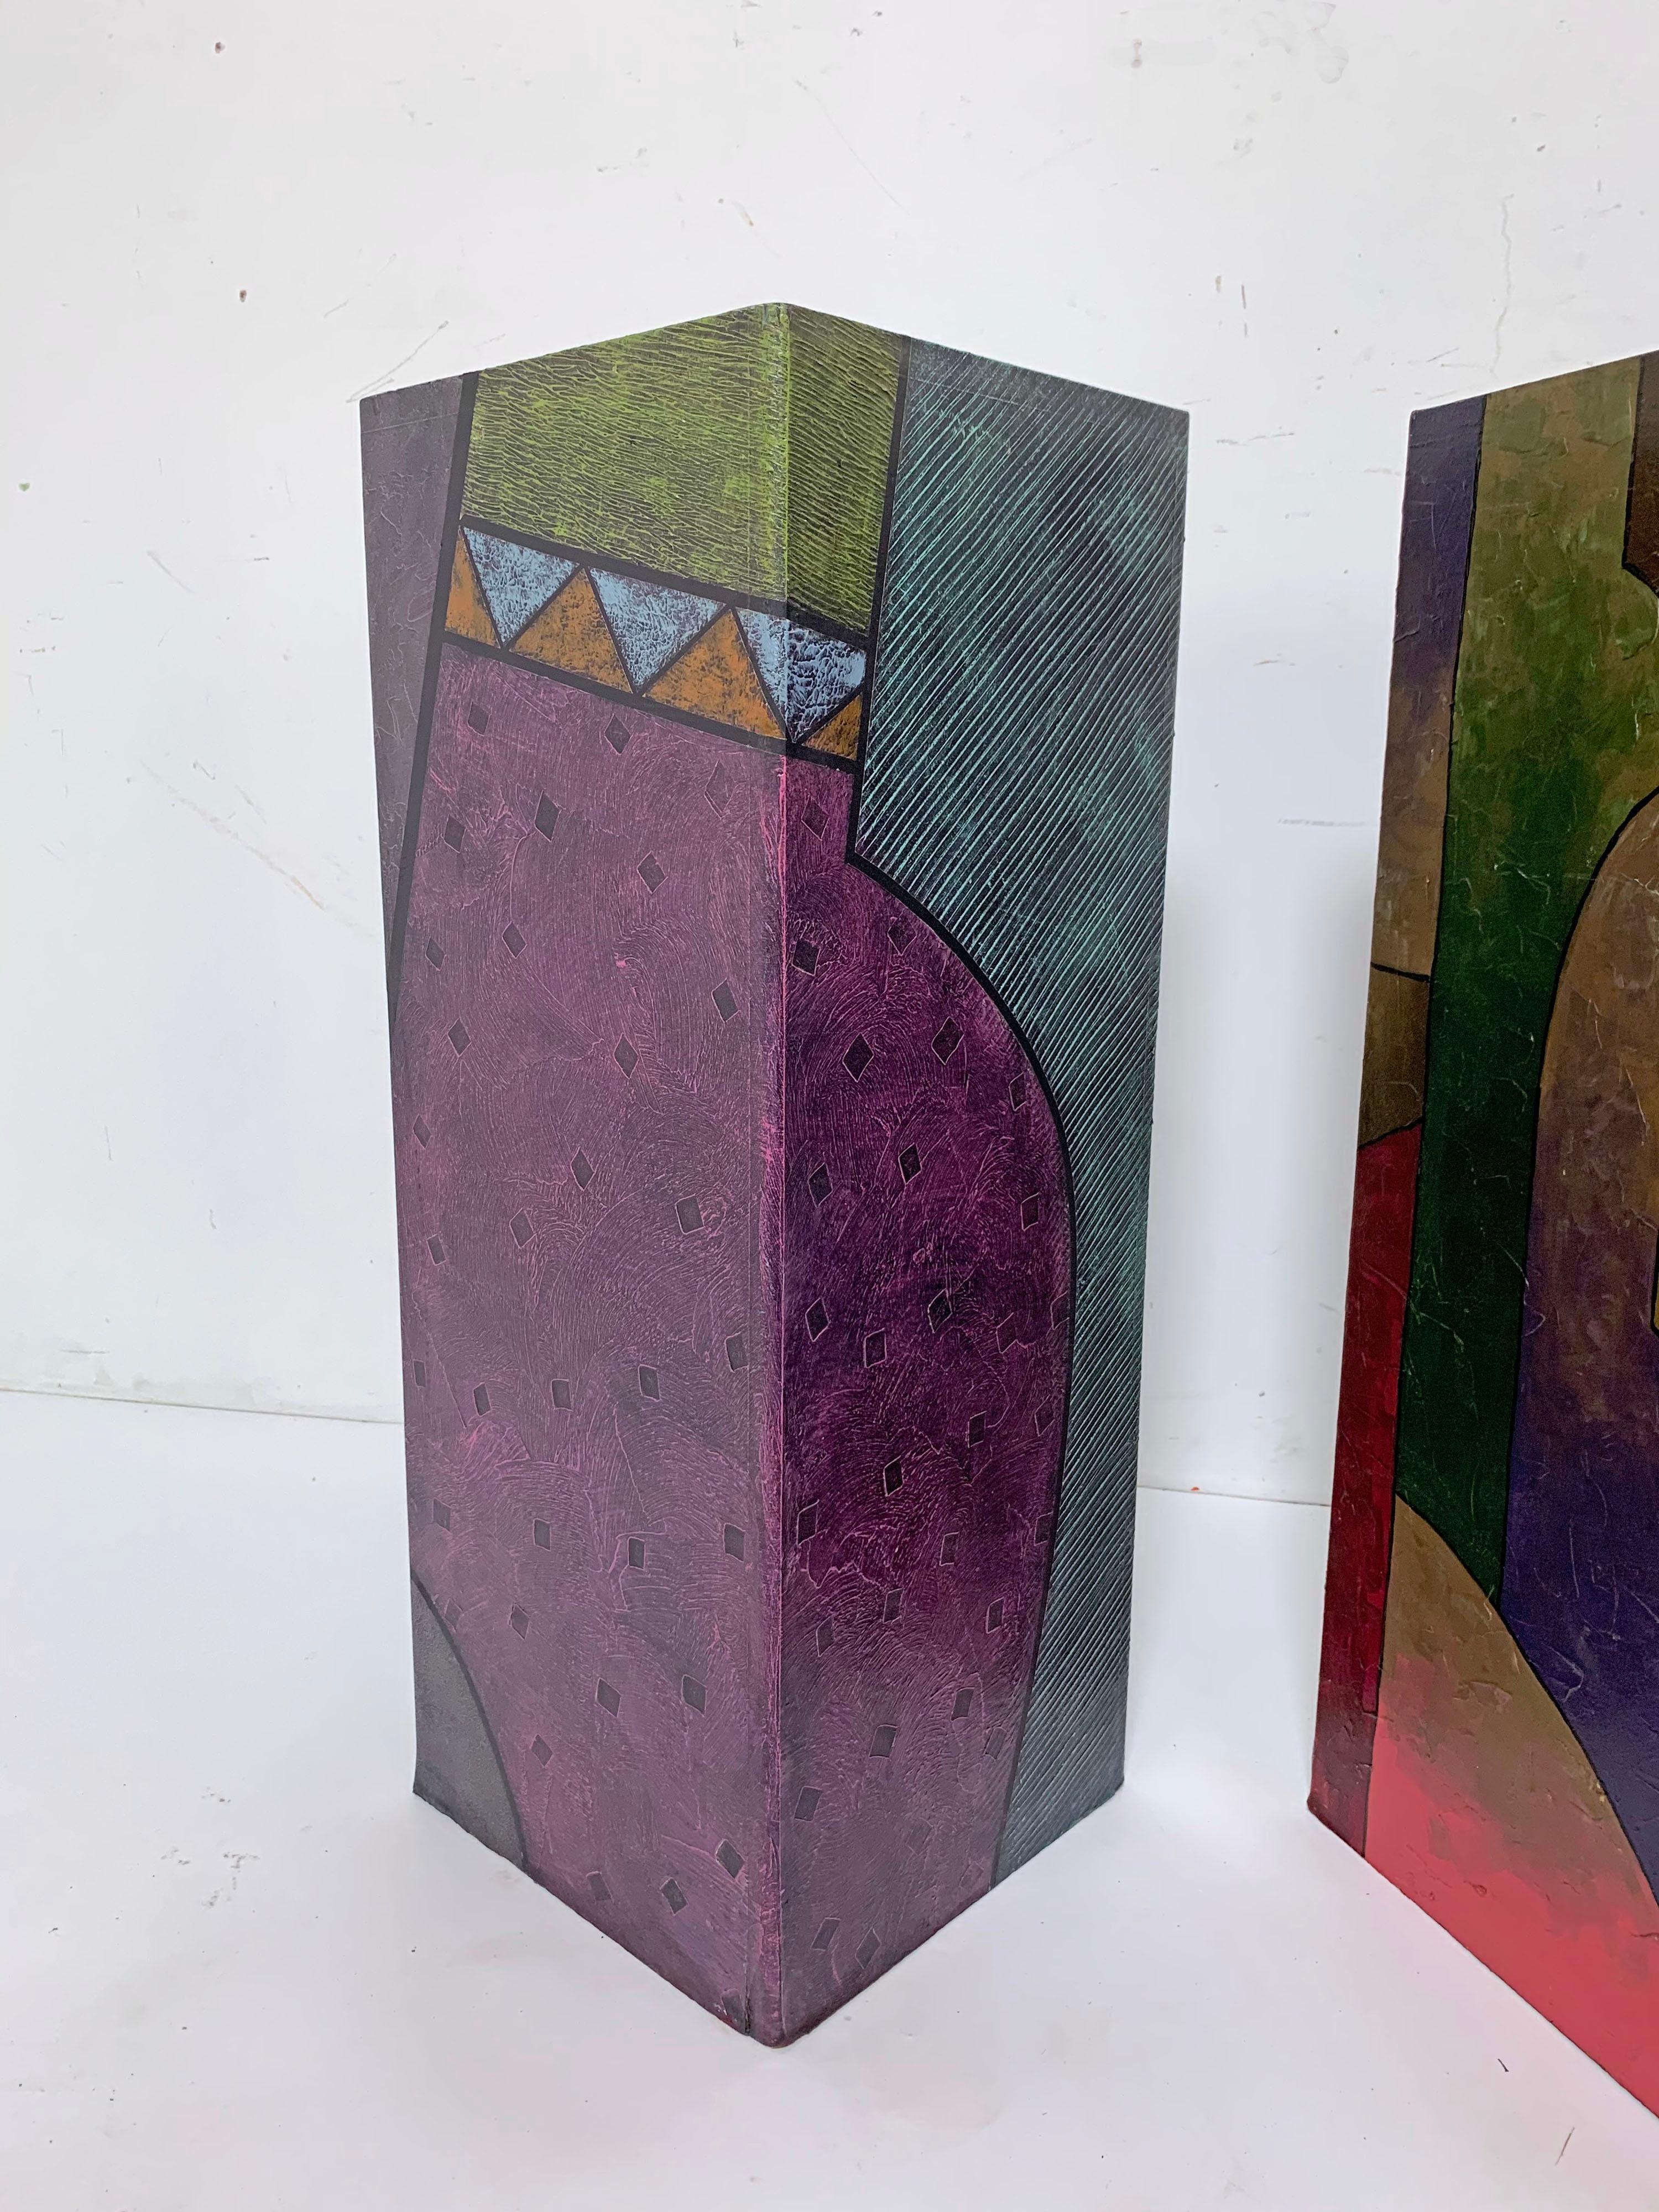 Pair of pedestals, hand painted in the influence of the Memphis Group, circa 1980s. Wonderful splash of abstract color and at the perfect height to serve as lamp stands or end tables.